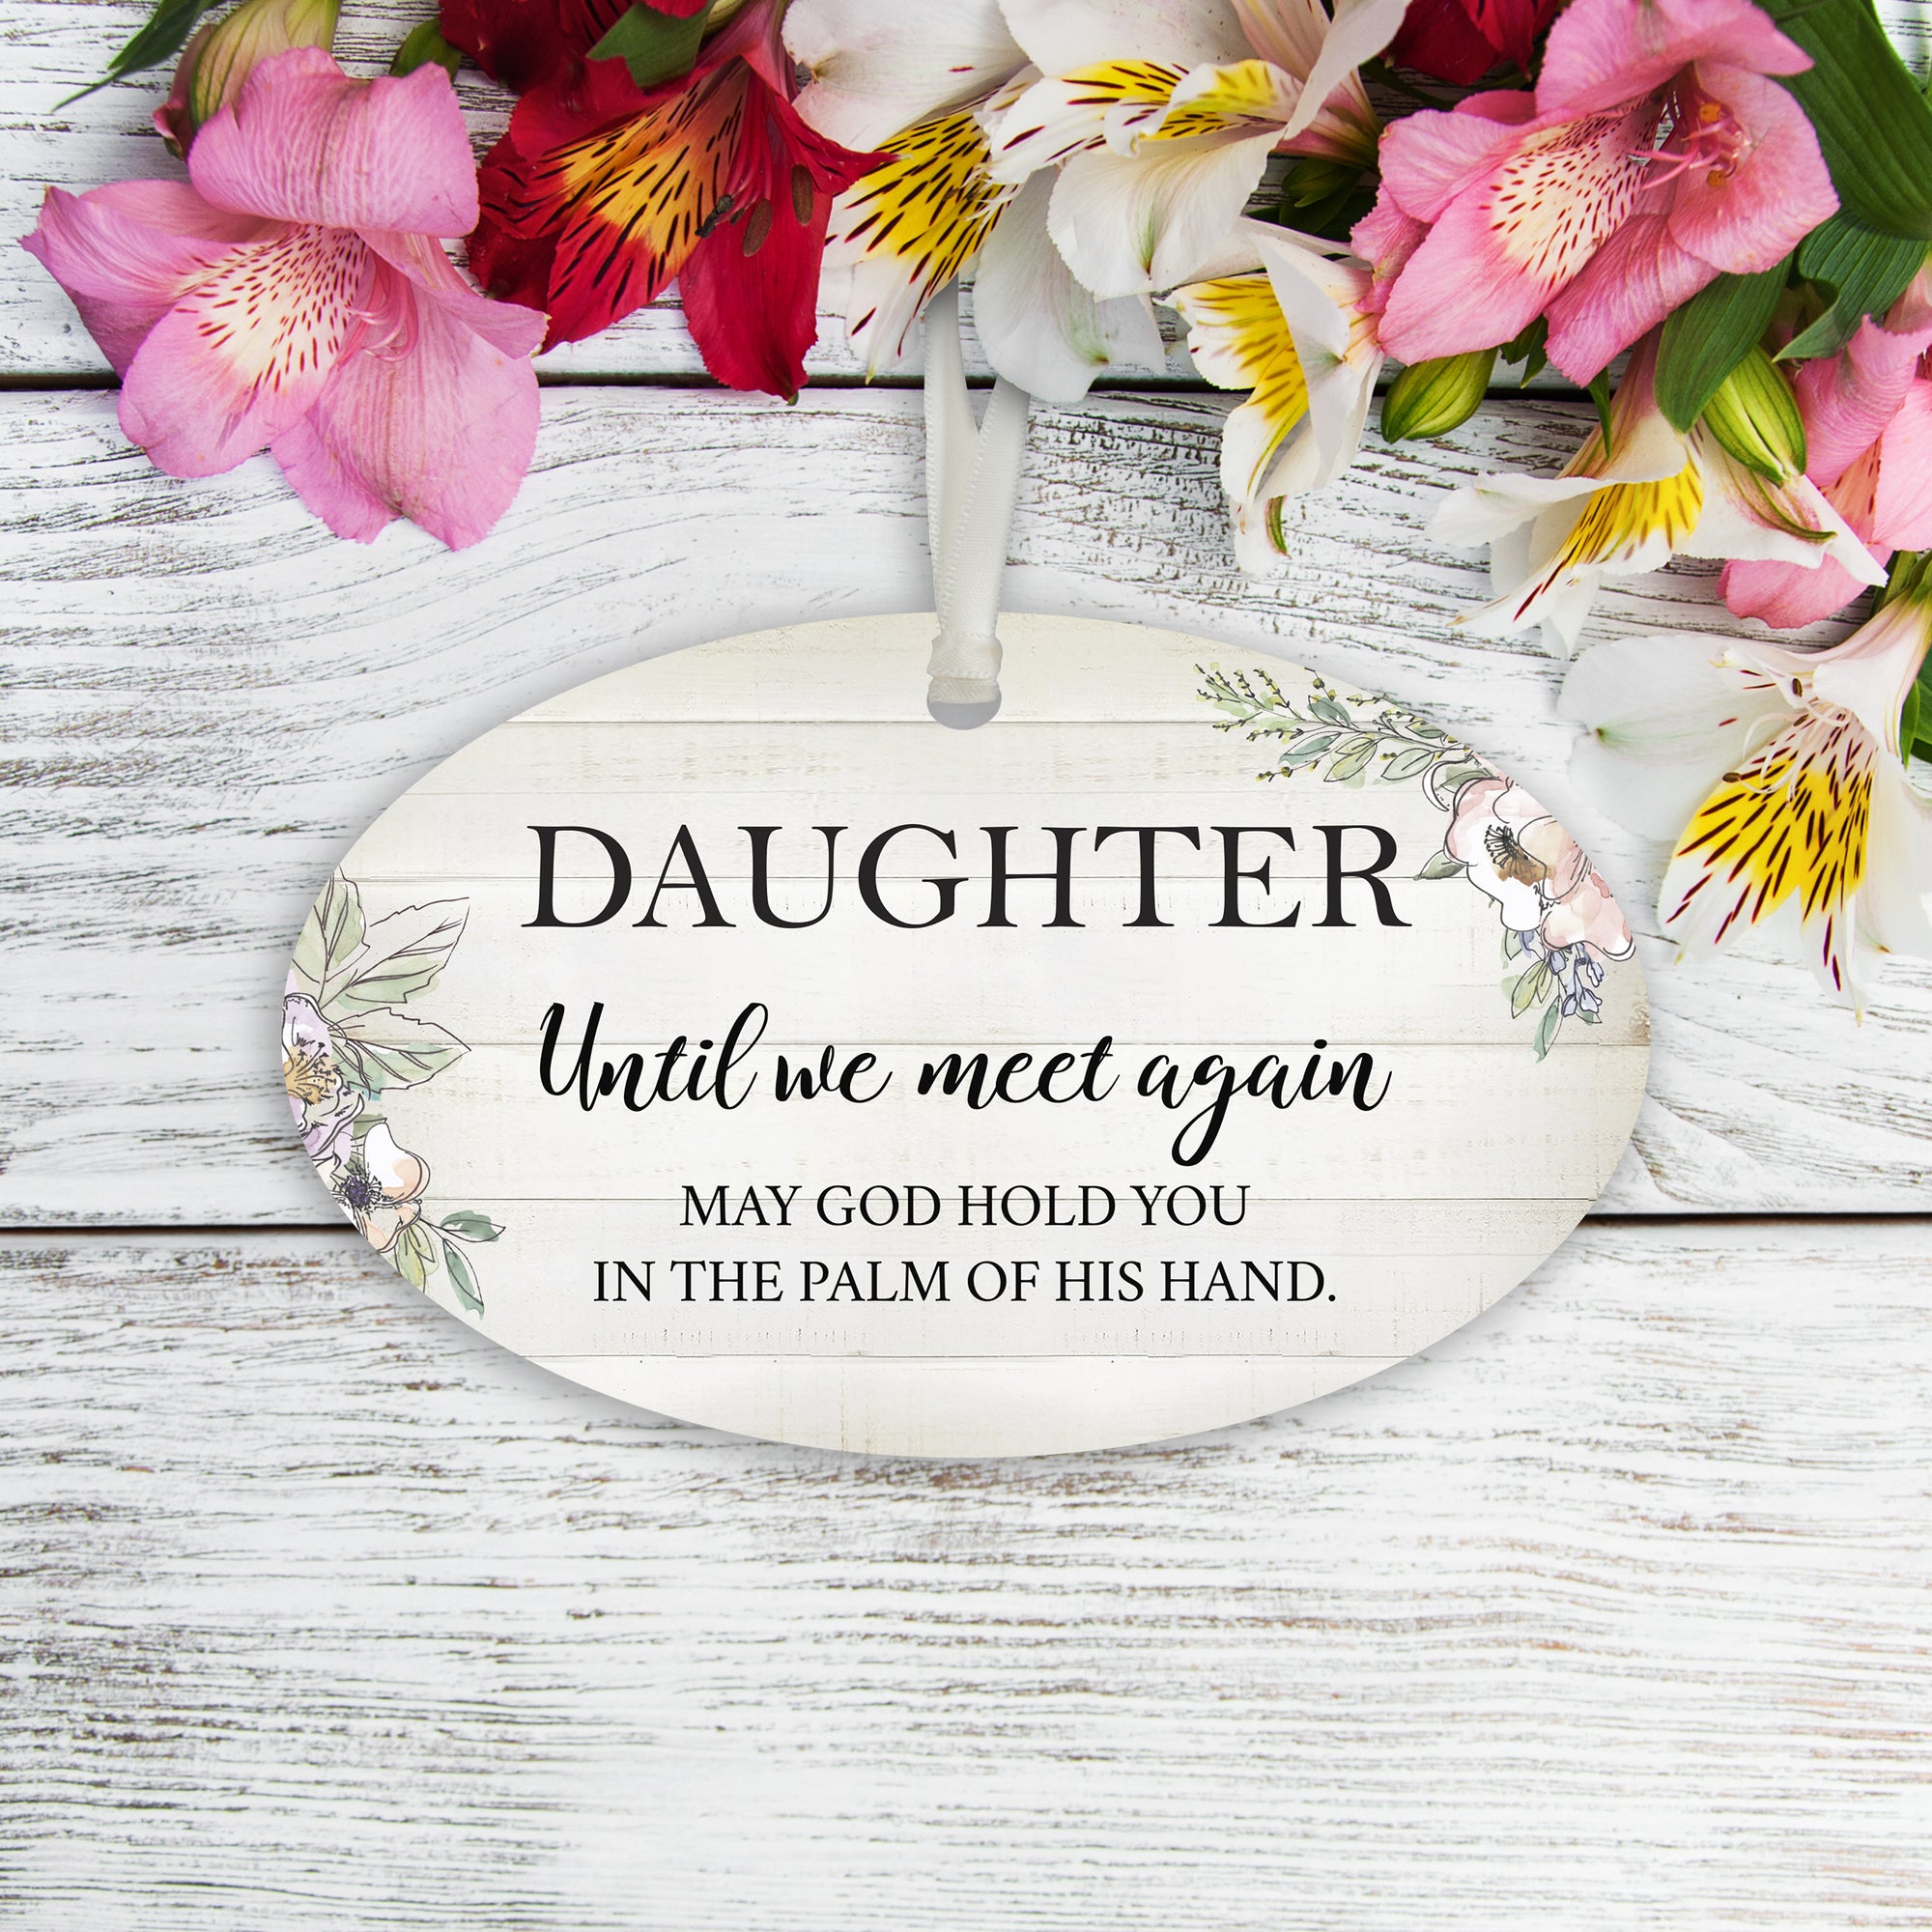 Beautiful memorial ornament with a comforting message – a cherished keepsake for those in grief